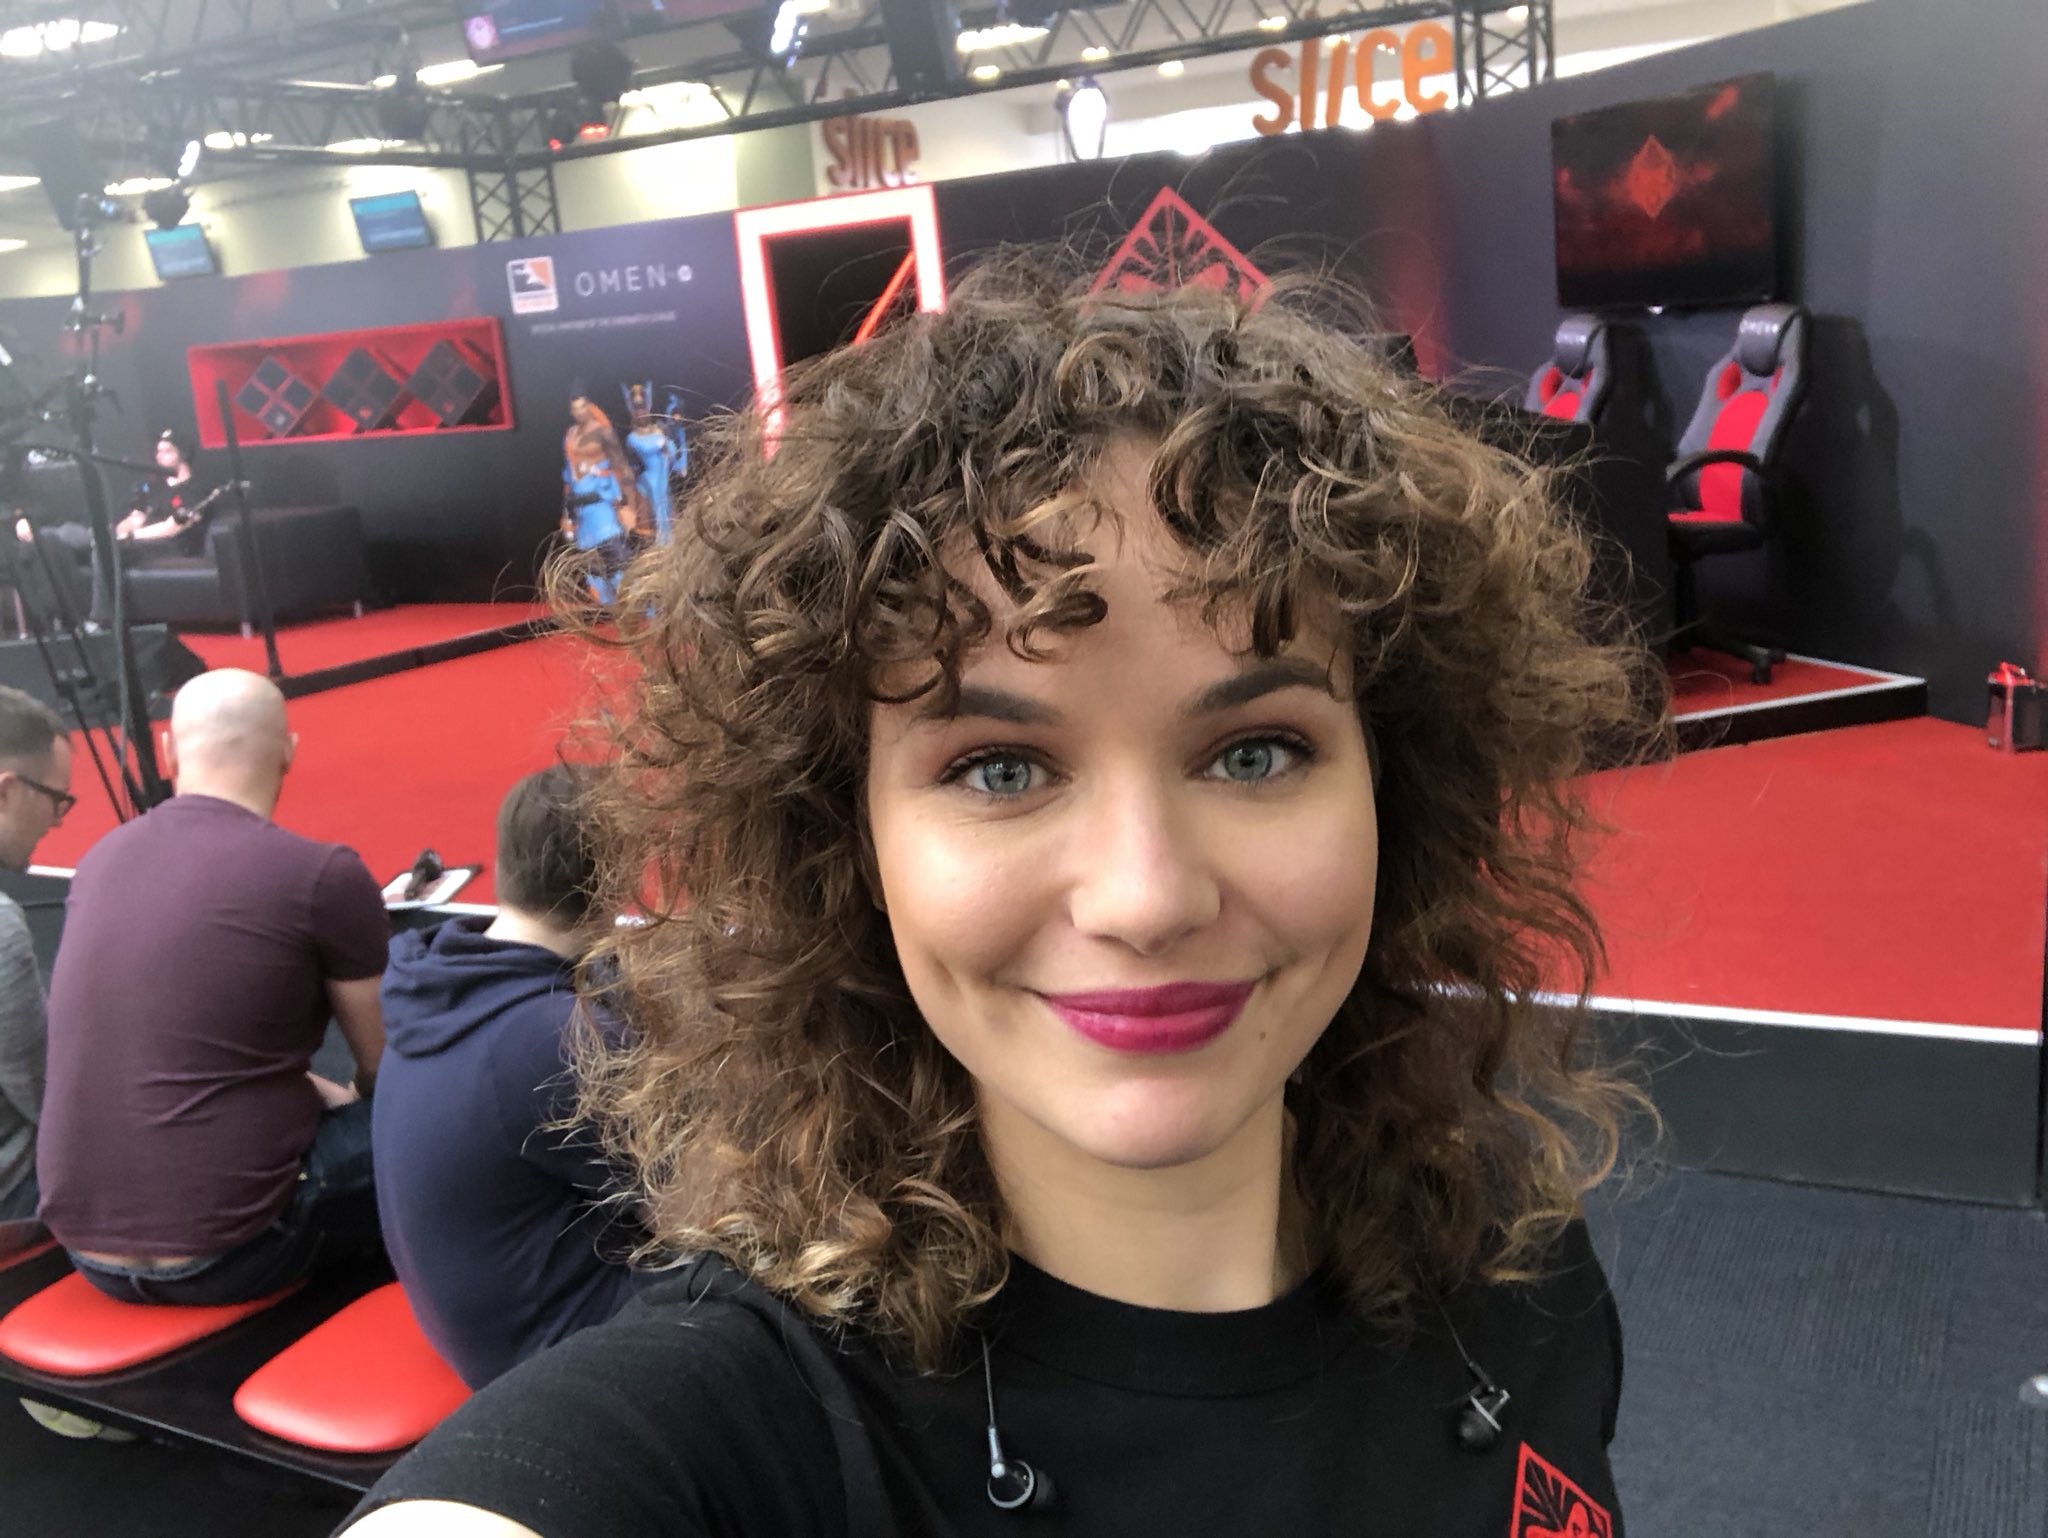 Frankie on Twitter: "I get to spending my weekend talking all things @PlayOverwatch at #PCGamerWeekender - if you're not here, you can watch the masterclasses on https://t.co/AVoFUEL4a4 https://t.co/uC7rQ1T74A" / Twitter